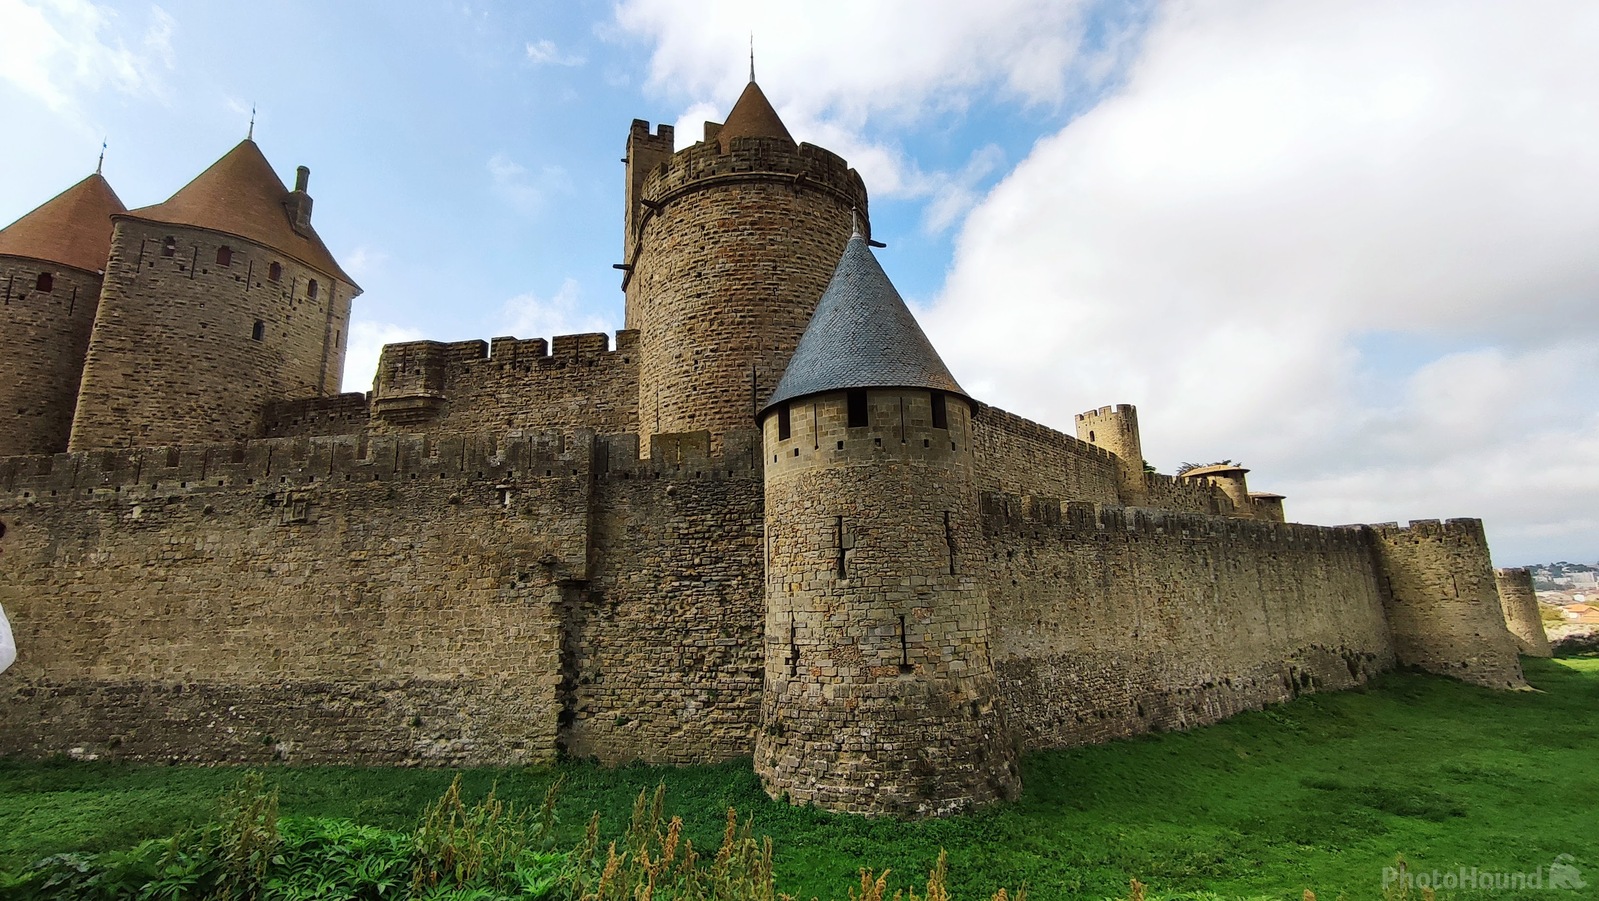 Image of Carcassonne Castle by David Lally